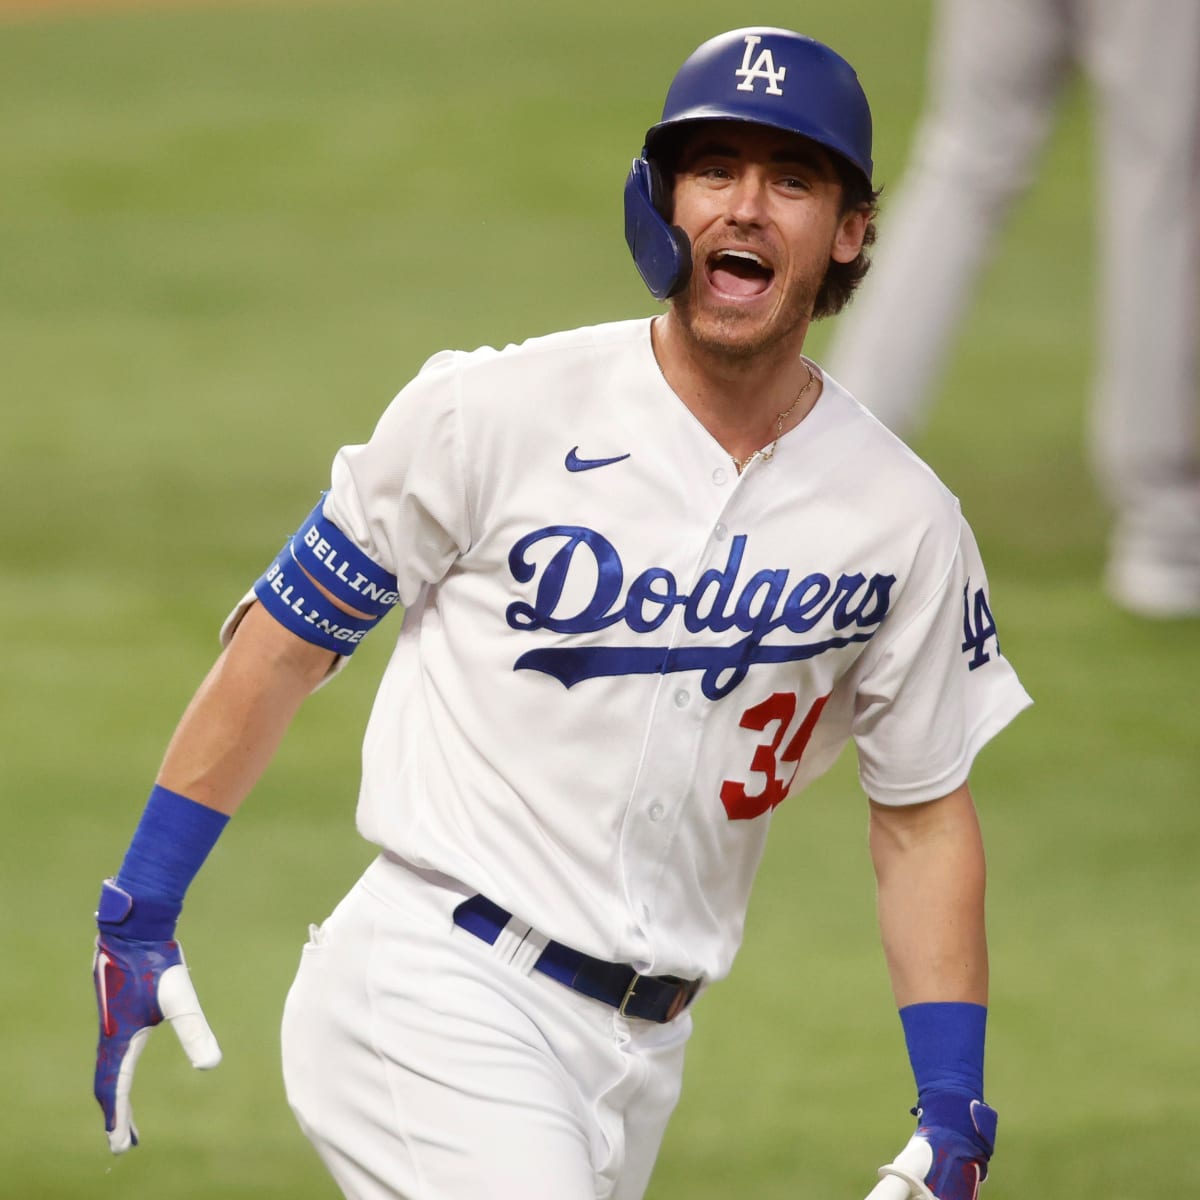 Recap: Cody Bellinger Hits 2 Home Runs To Lead Dodgers In Comeback